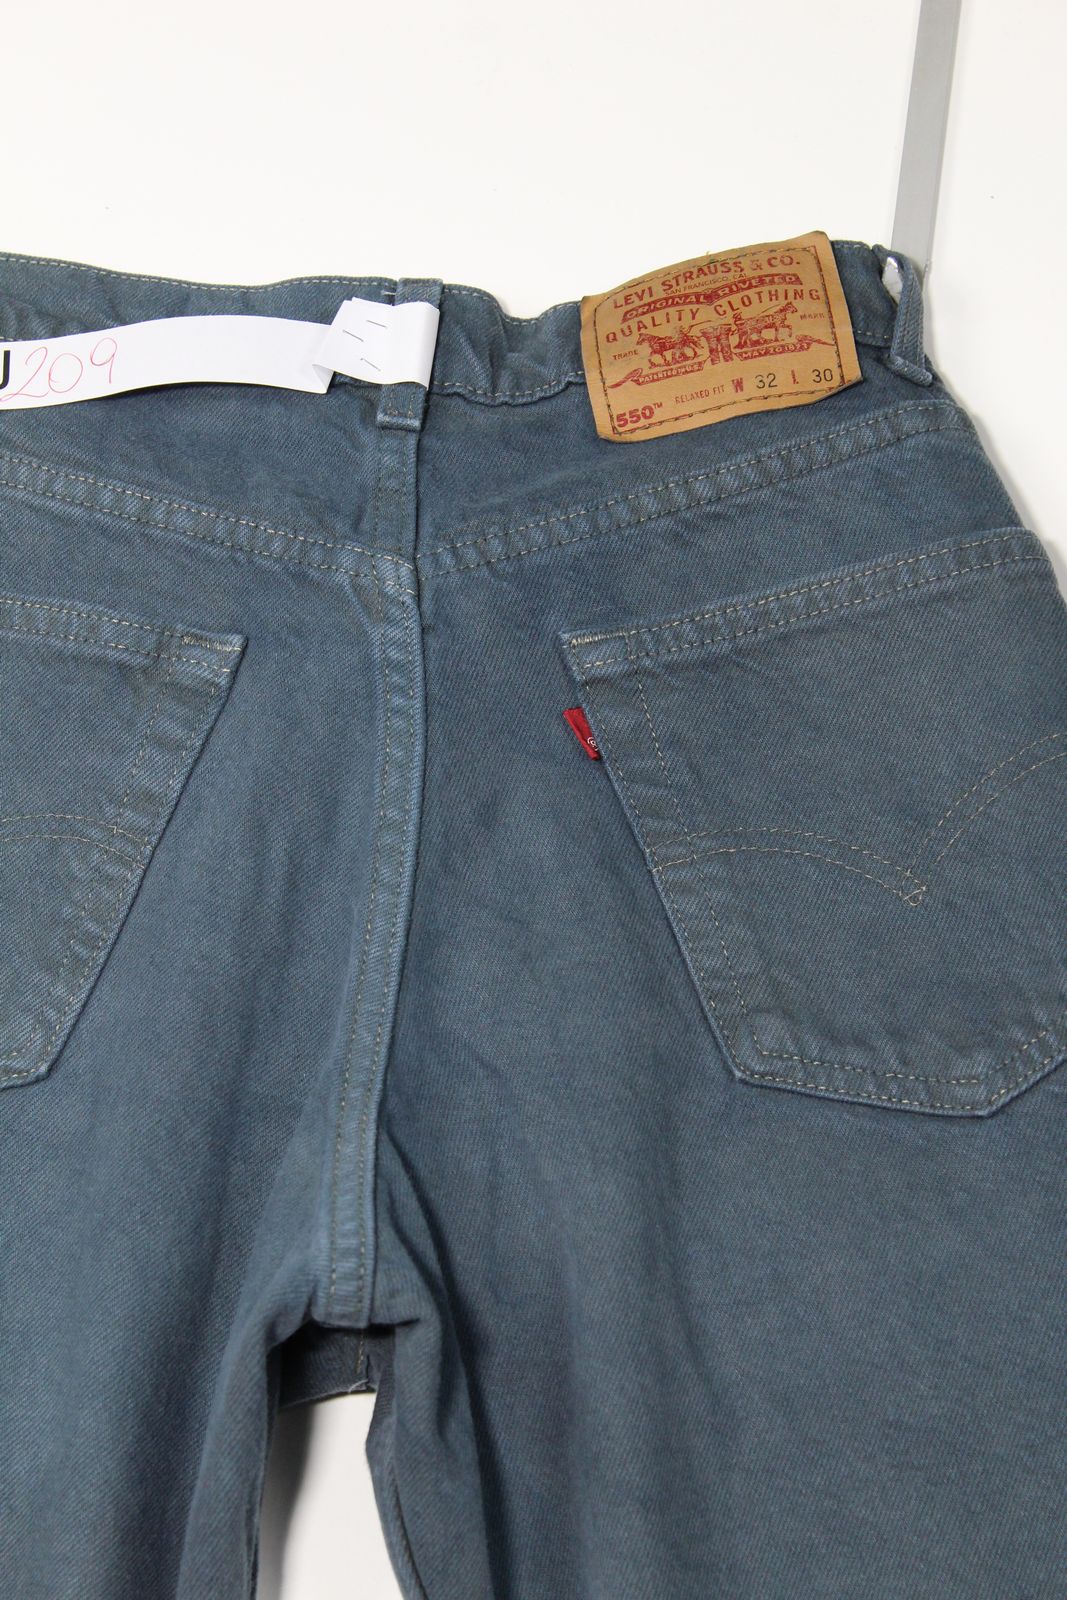 Levi's 550 Relaxed Fit Blu Denim W32 L30 Made In USA Jeans Vintage